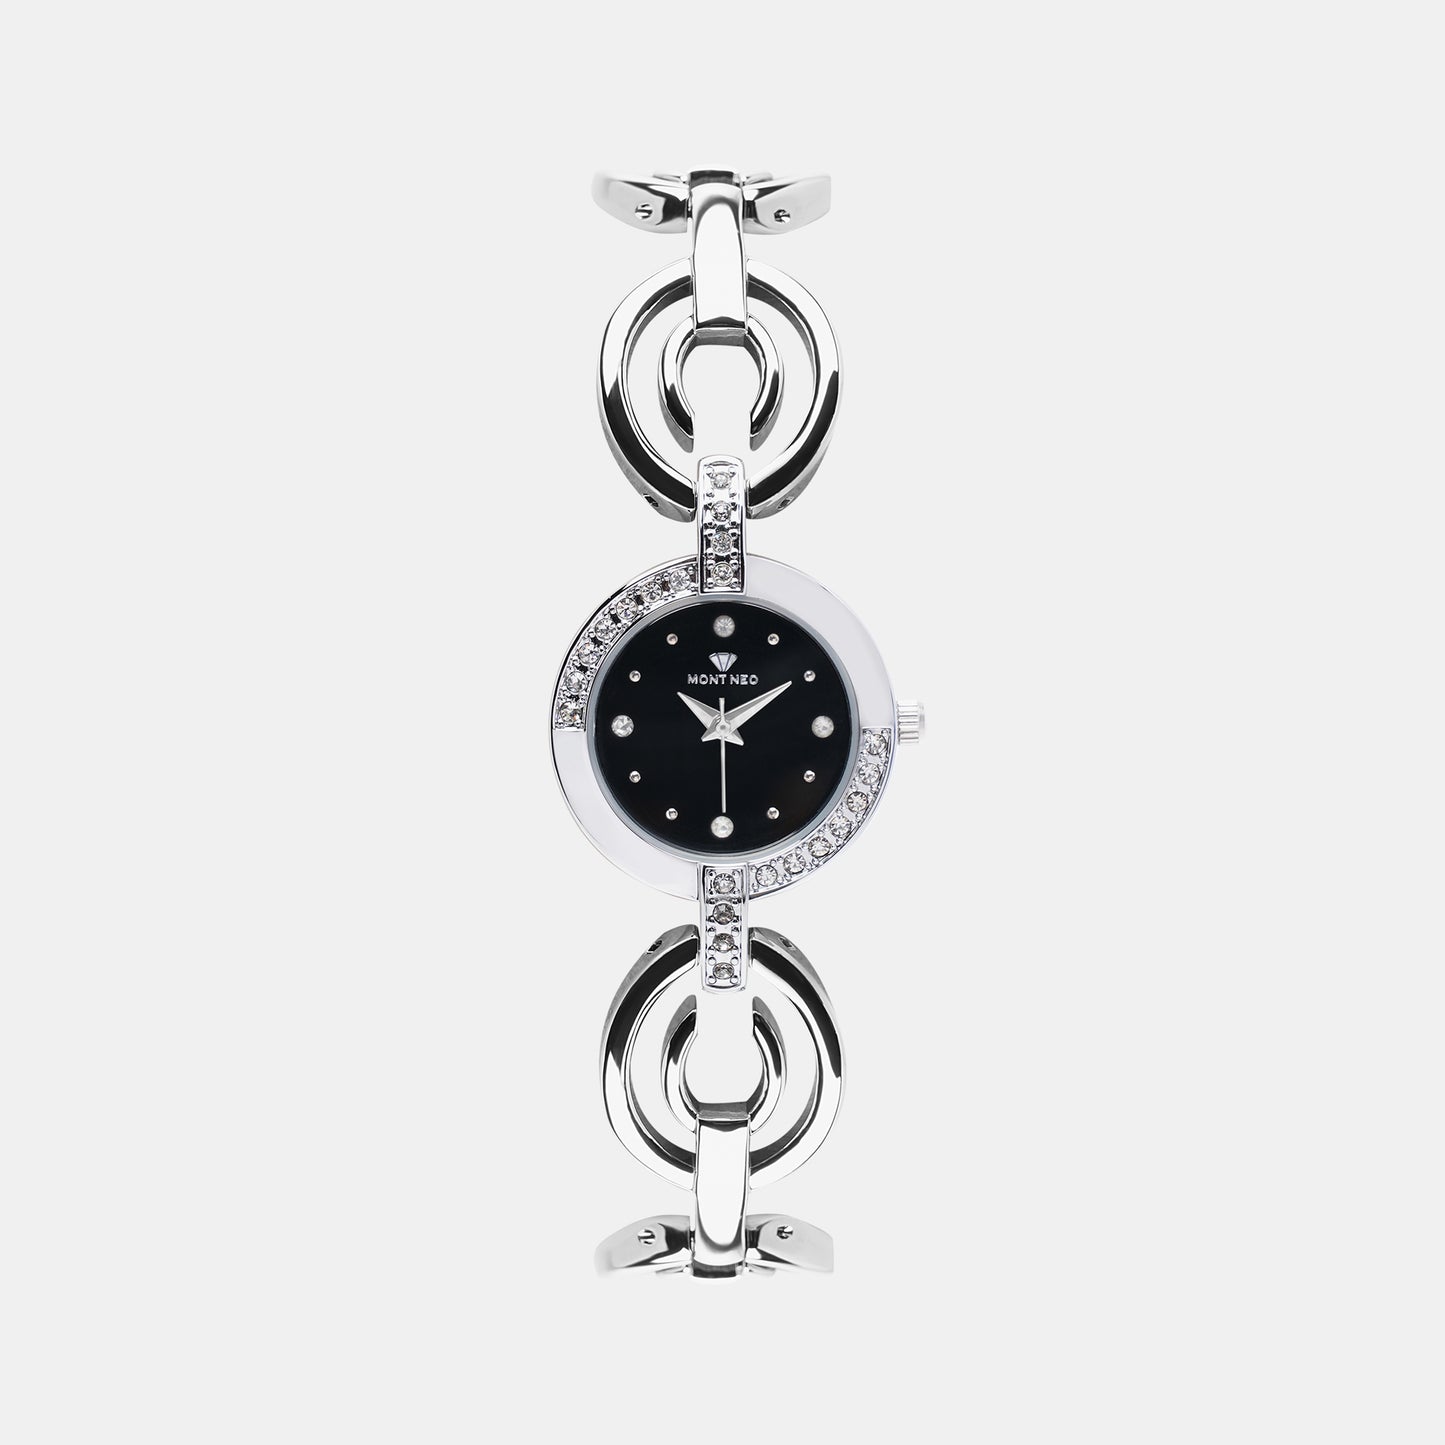 Chic Black Analog Female Stainless Steel Watch 6303T-M1104